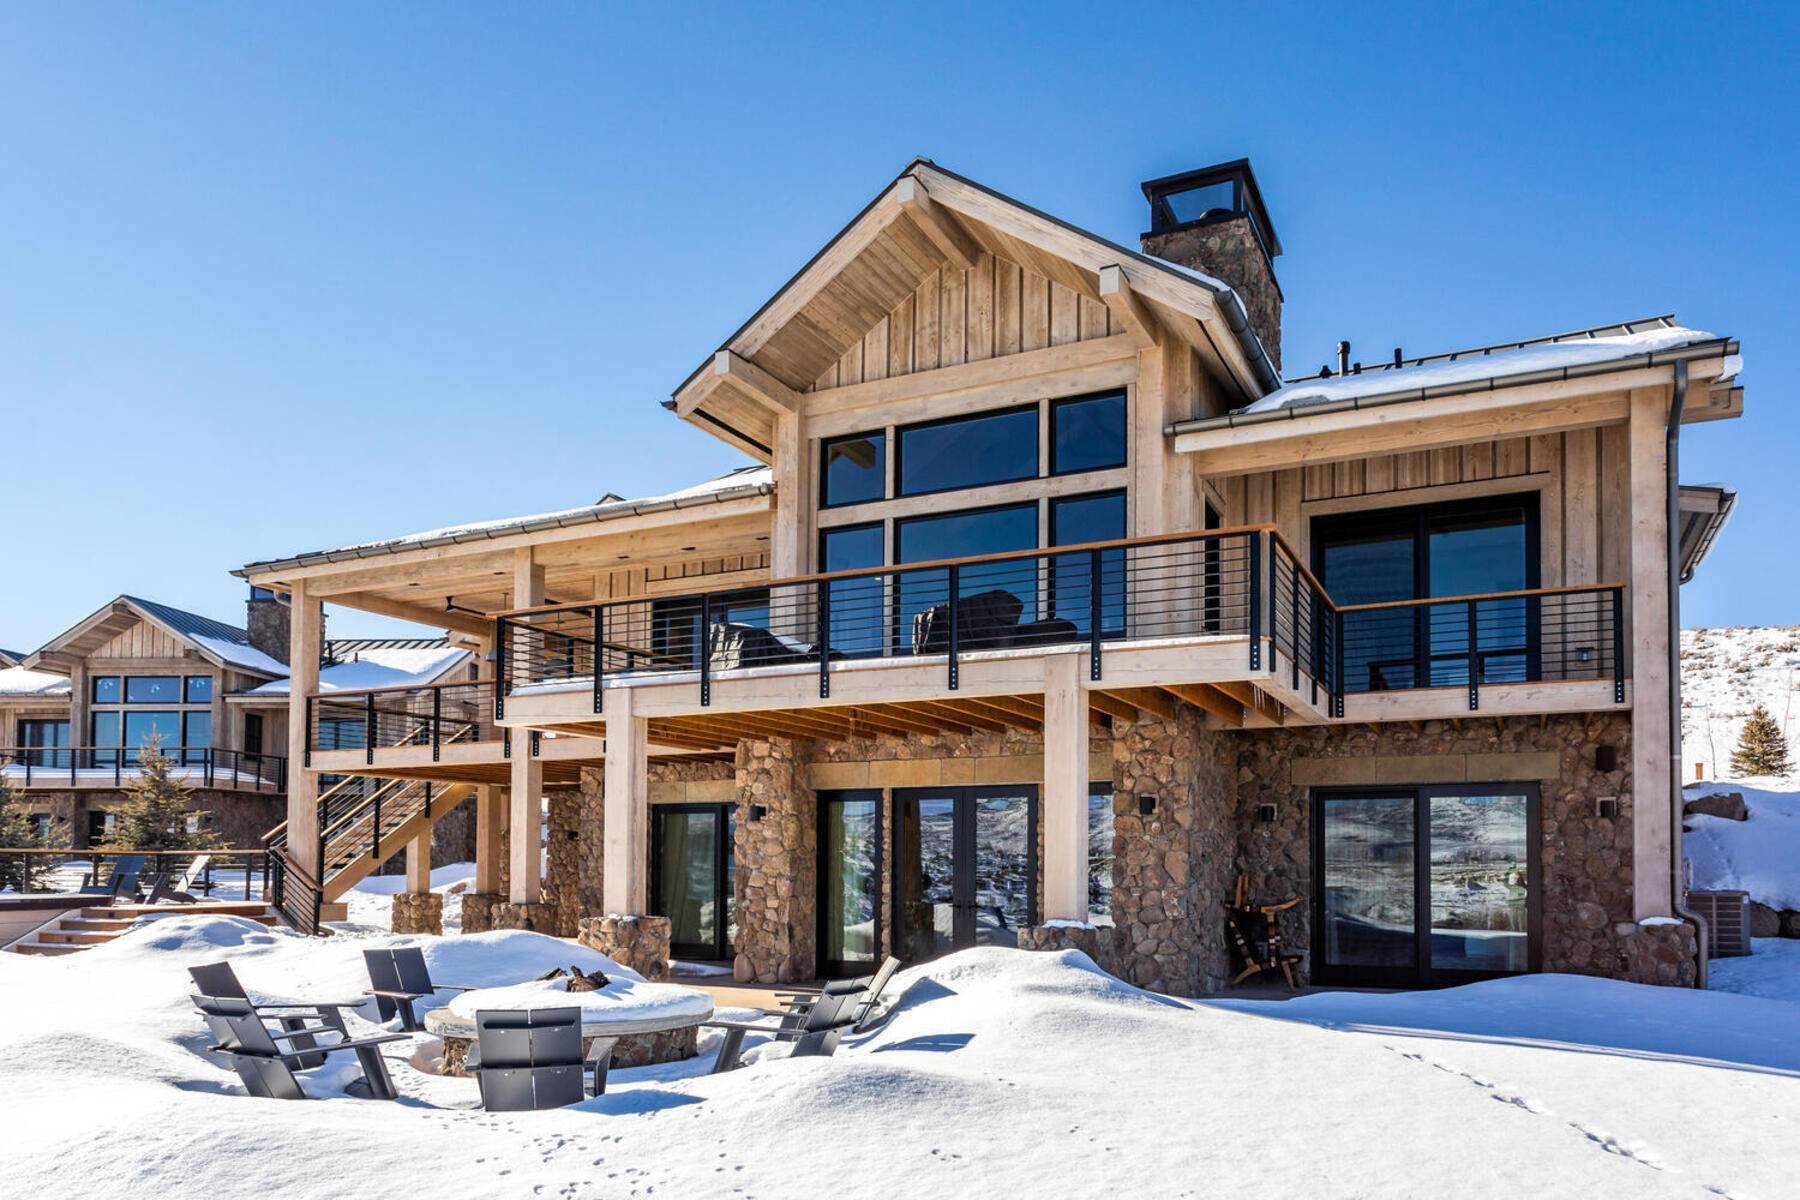 49. Fractional Ownership Property for Sale at 1/8th Fractional Ownership Opportunity at Victory Ranch in Brand New Kingfisher 7485 E Moon Light Drive, #309G, 5.39 Heber City, Utah 84032 United States